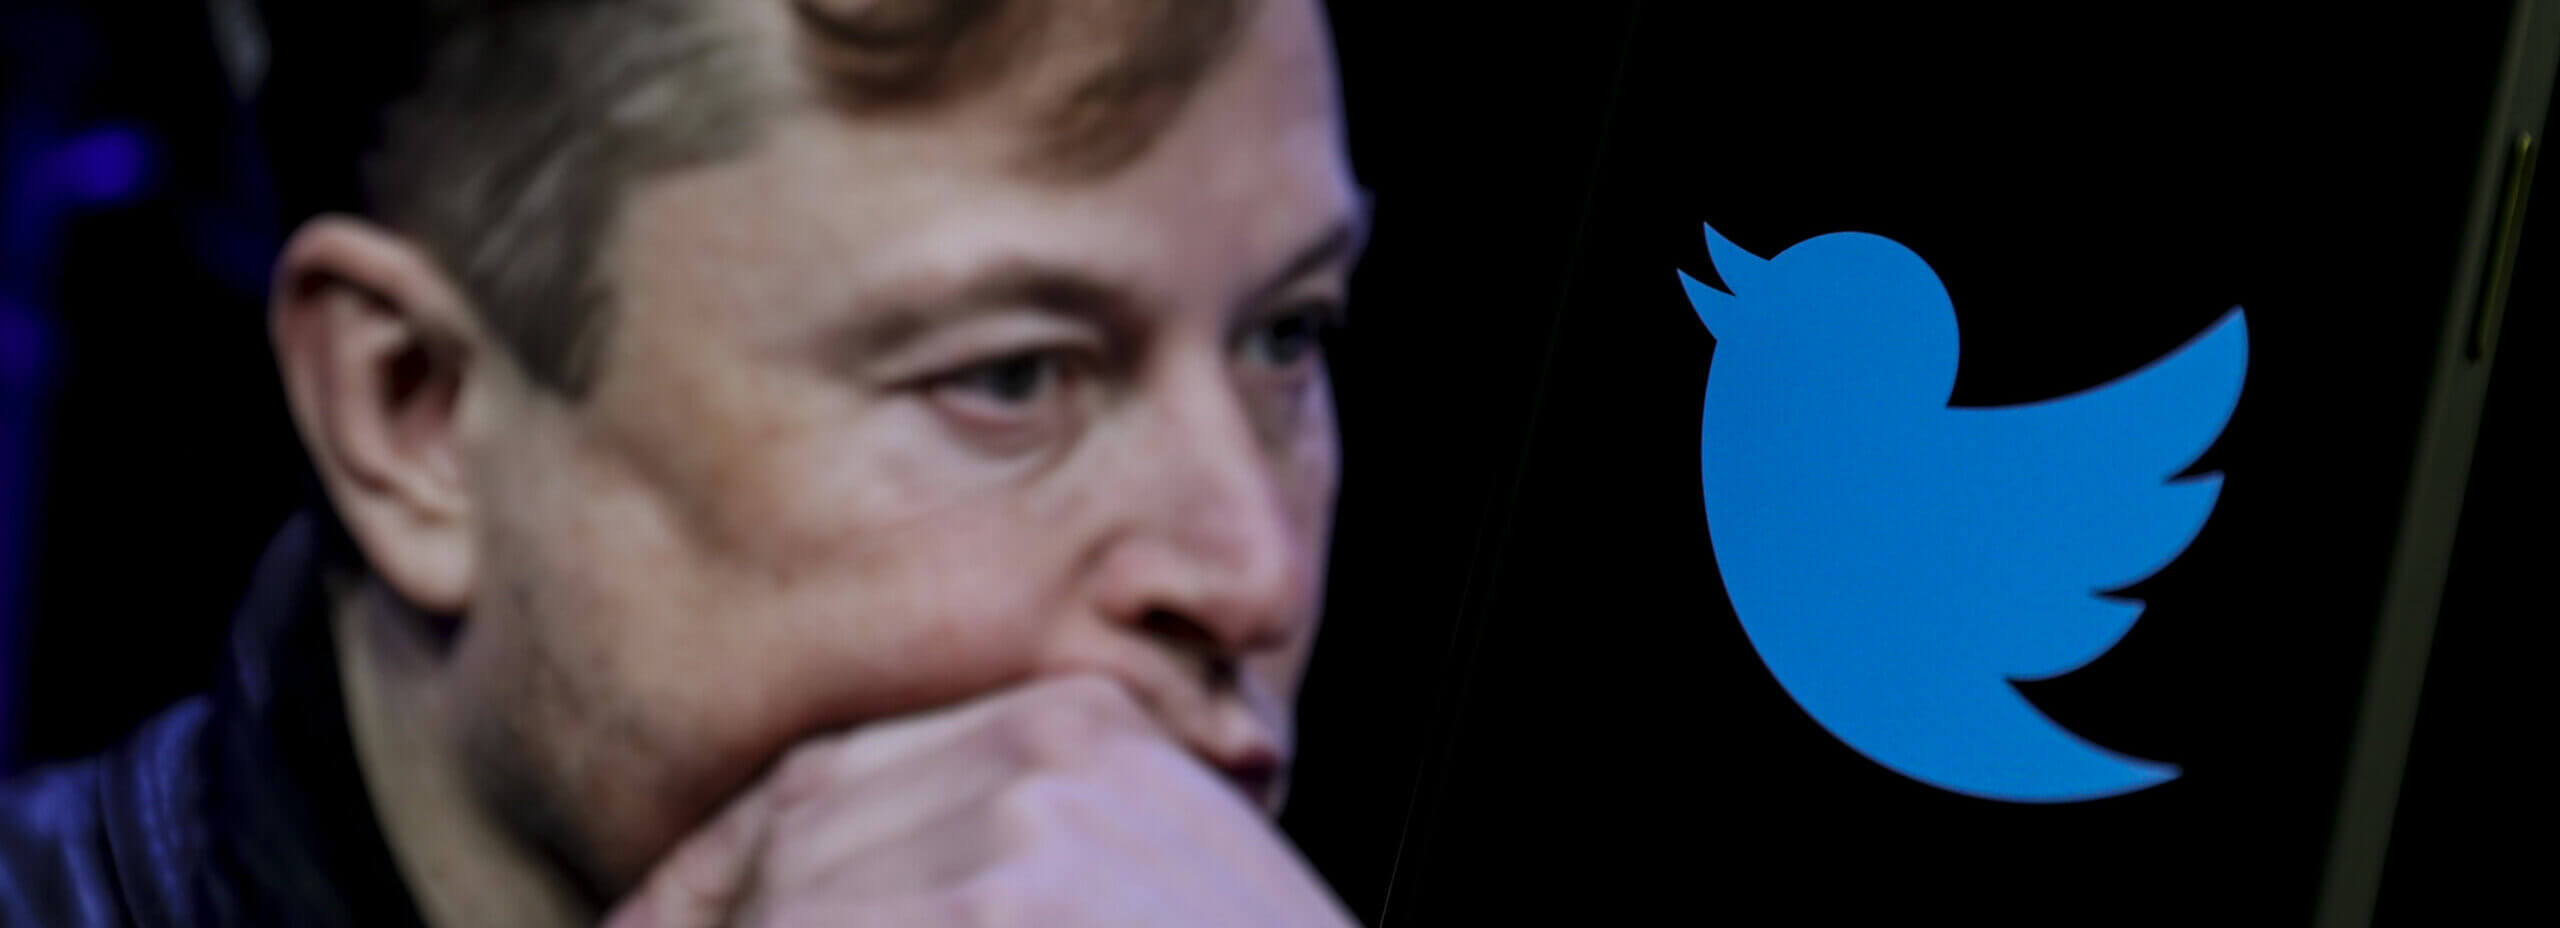 FTC Demands All of Elon Musk’s Twitter Communications, Identity of All Journalists Granted Access to Company Records › American Greatness